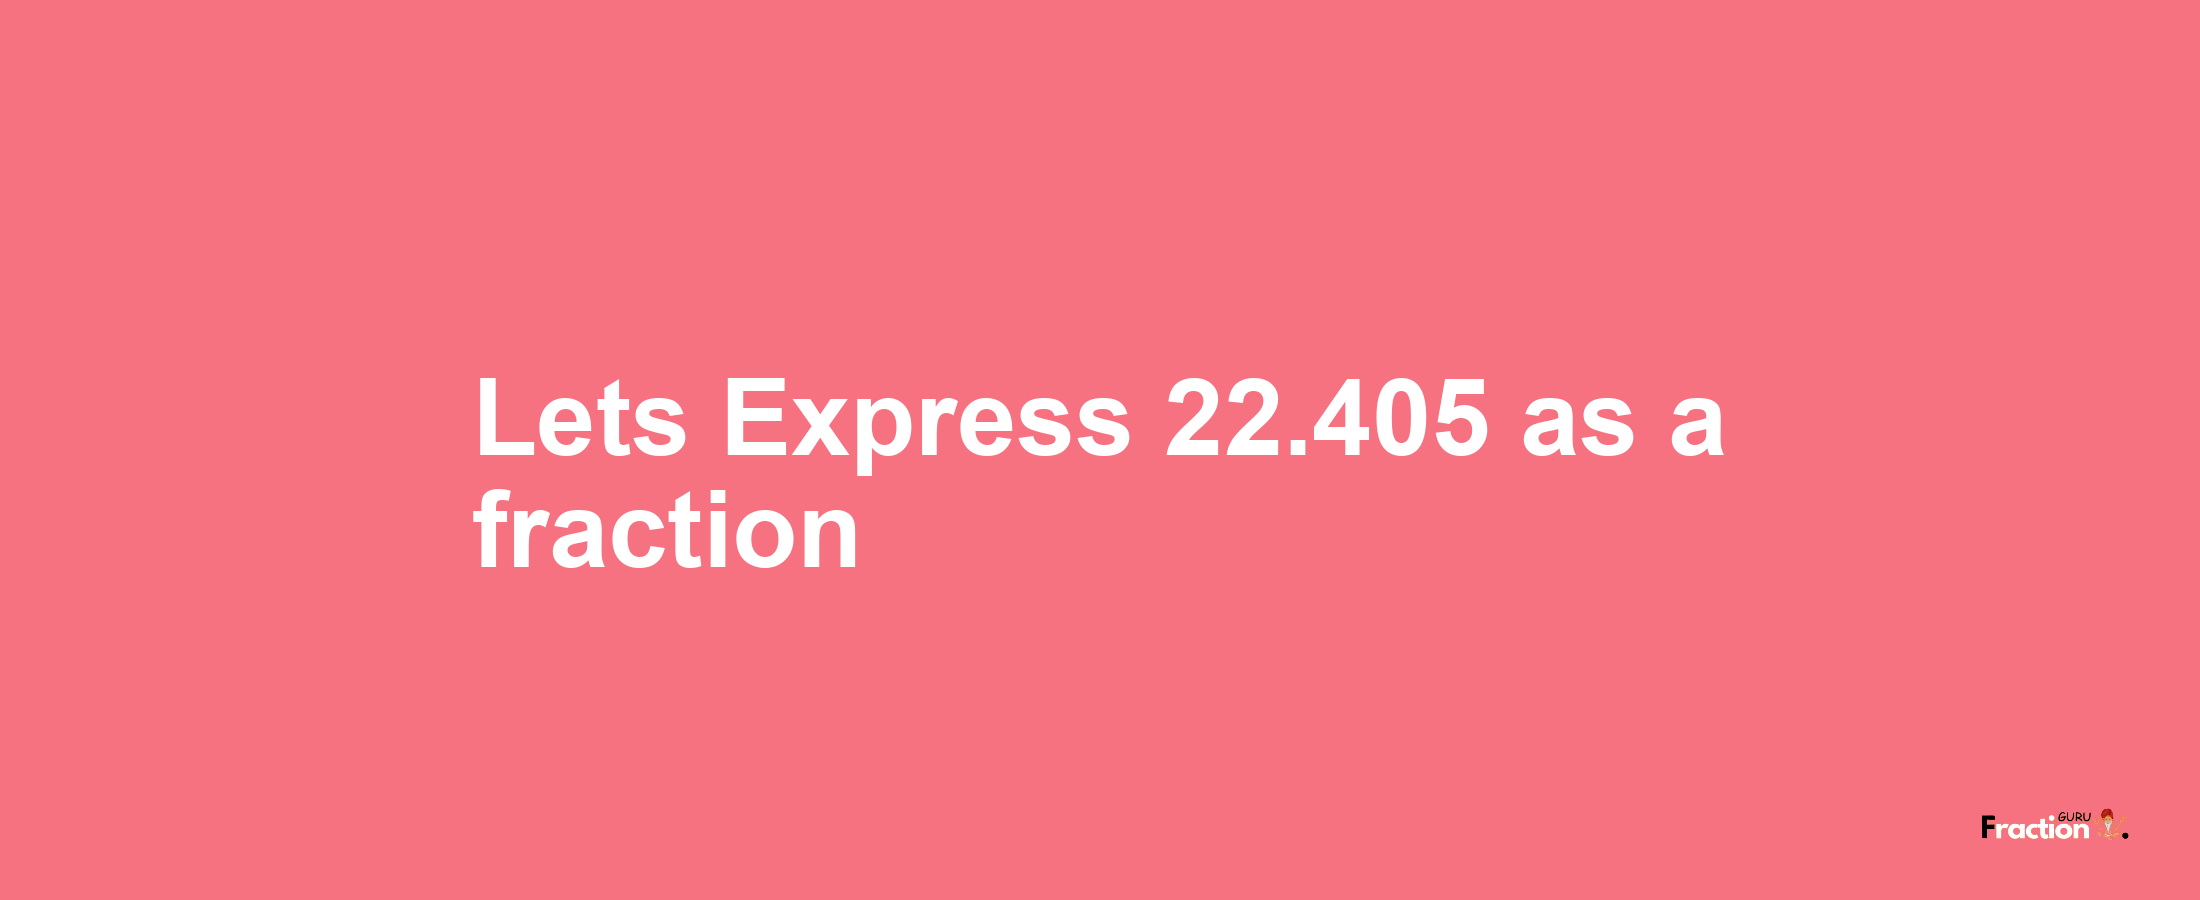 Lets Express 22.405 as afraction